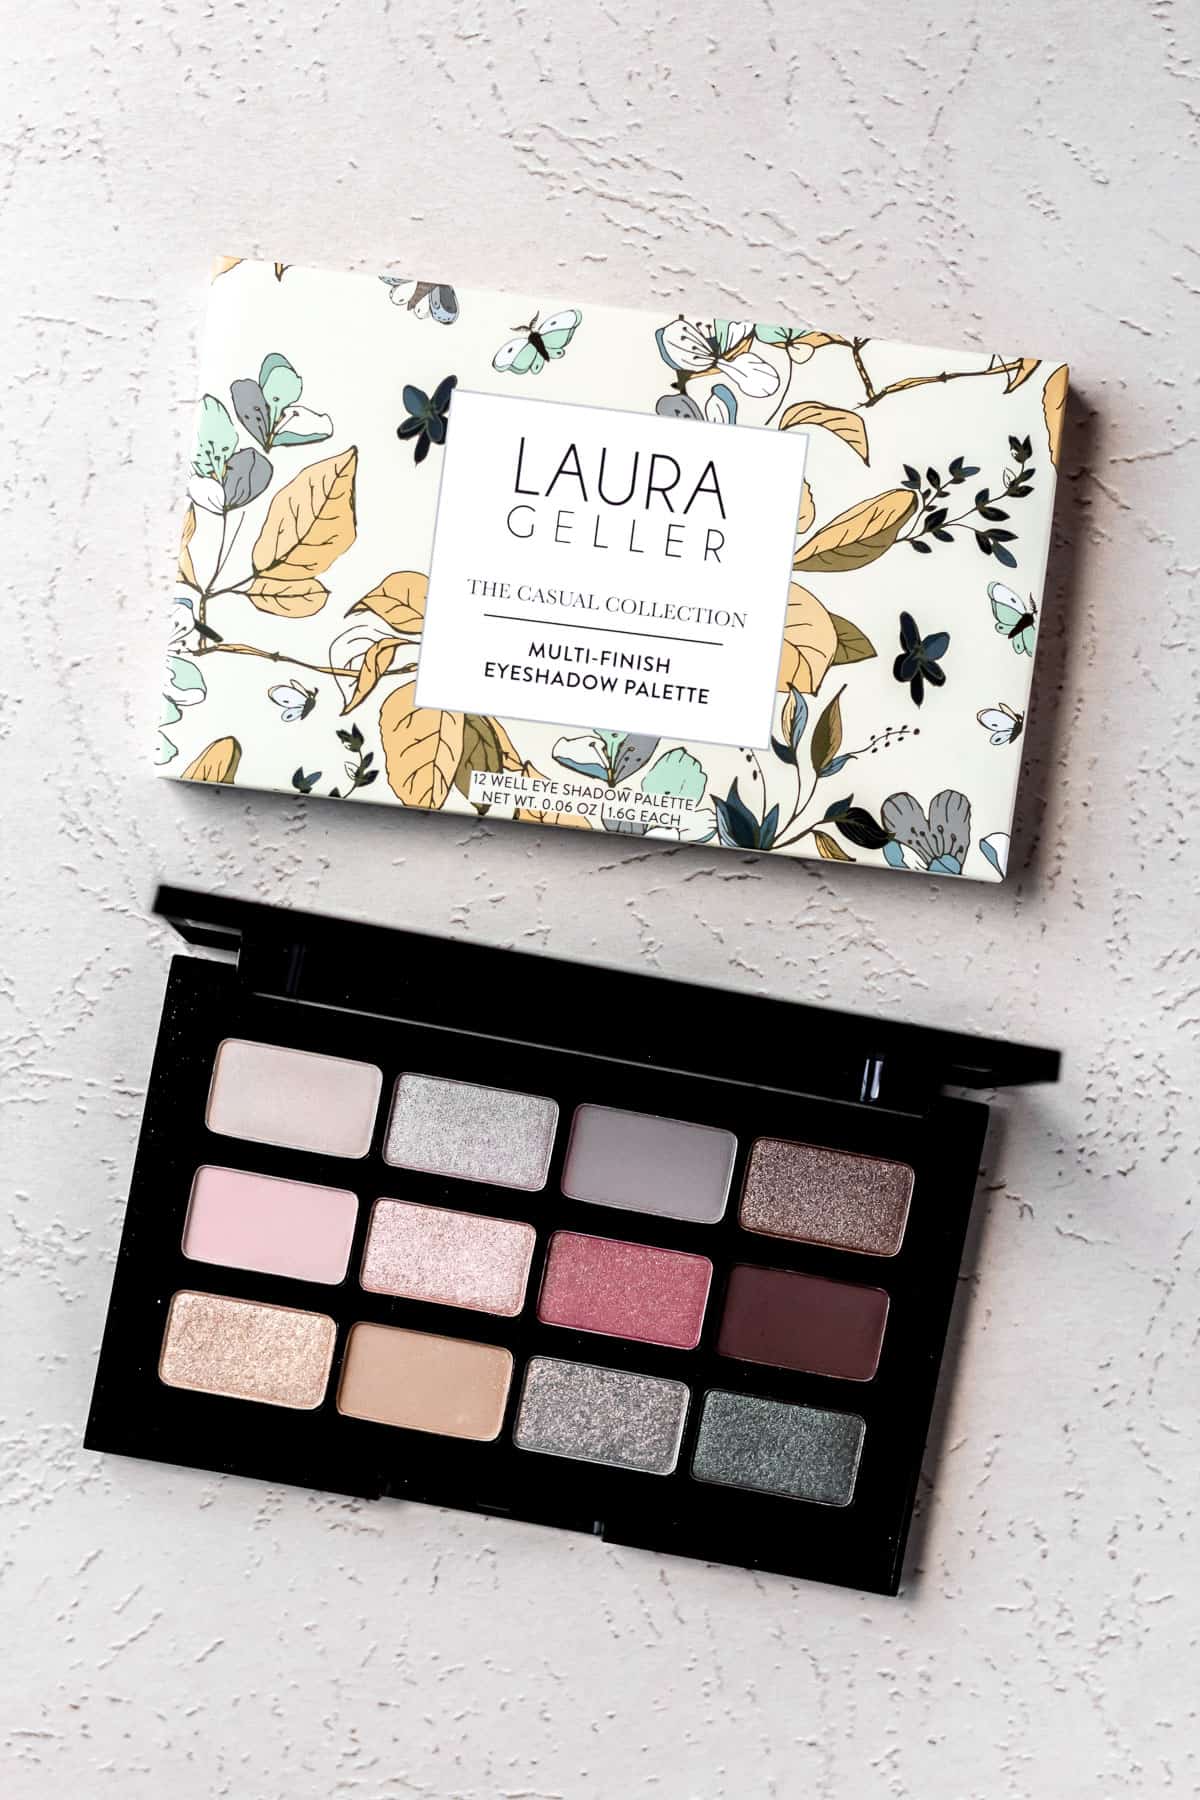 Laura Geller The Casual Collection Multi-Finish Eyeshadow Palette and box on a light background